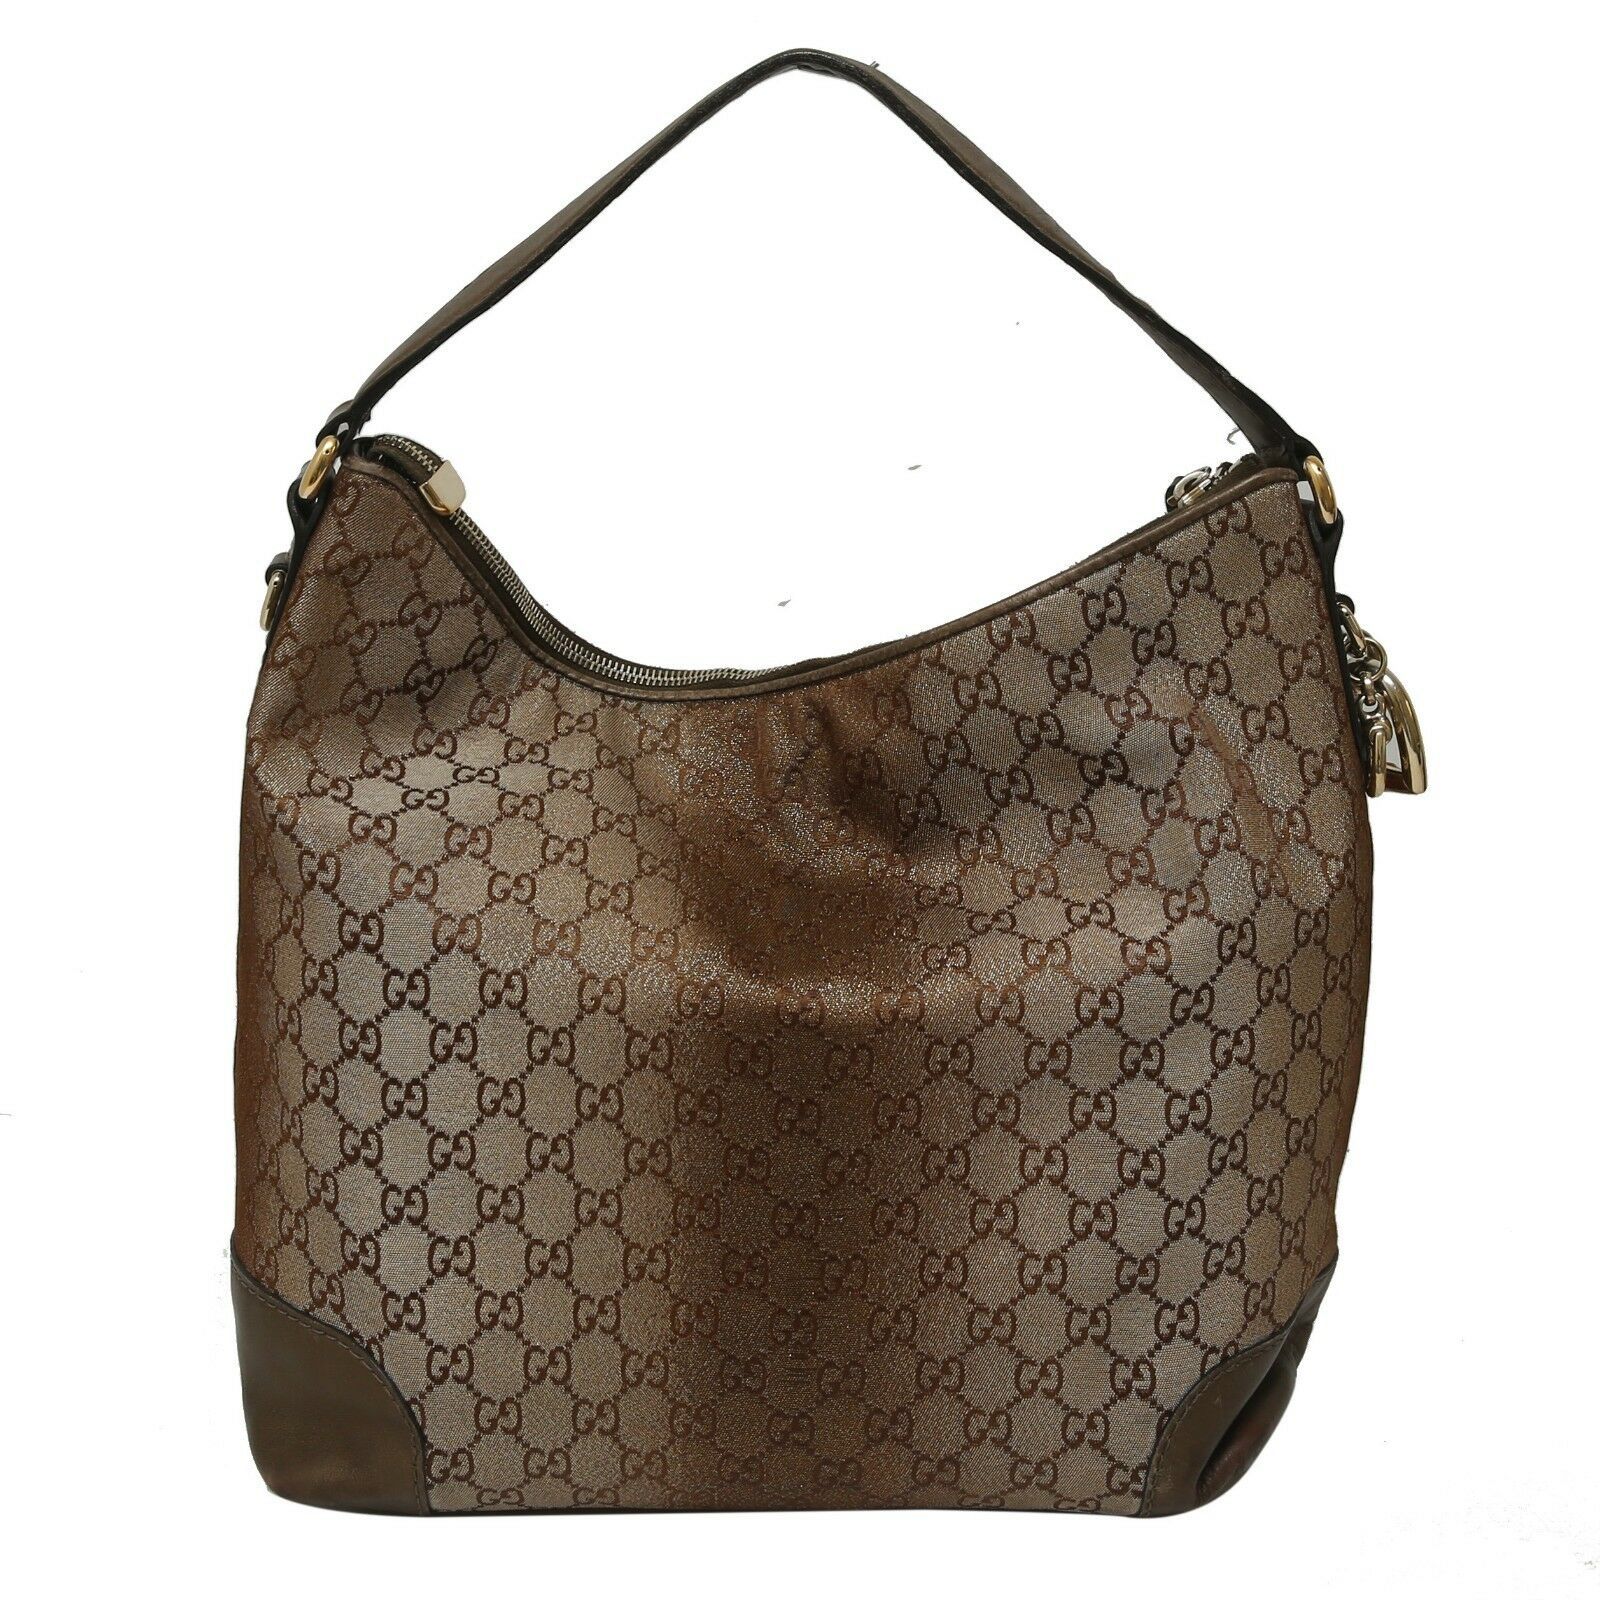 Authentic GUCCI Guccissima Canvas Glitter Hobo Bag with Heart Motif Leather Trim - £375.99 GBP